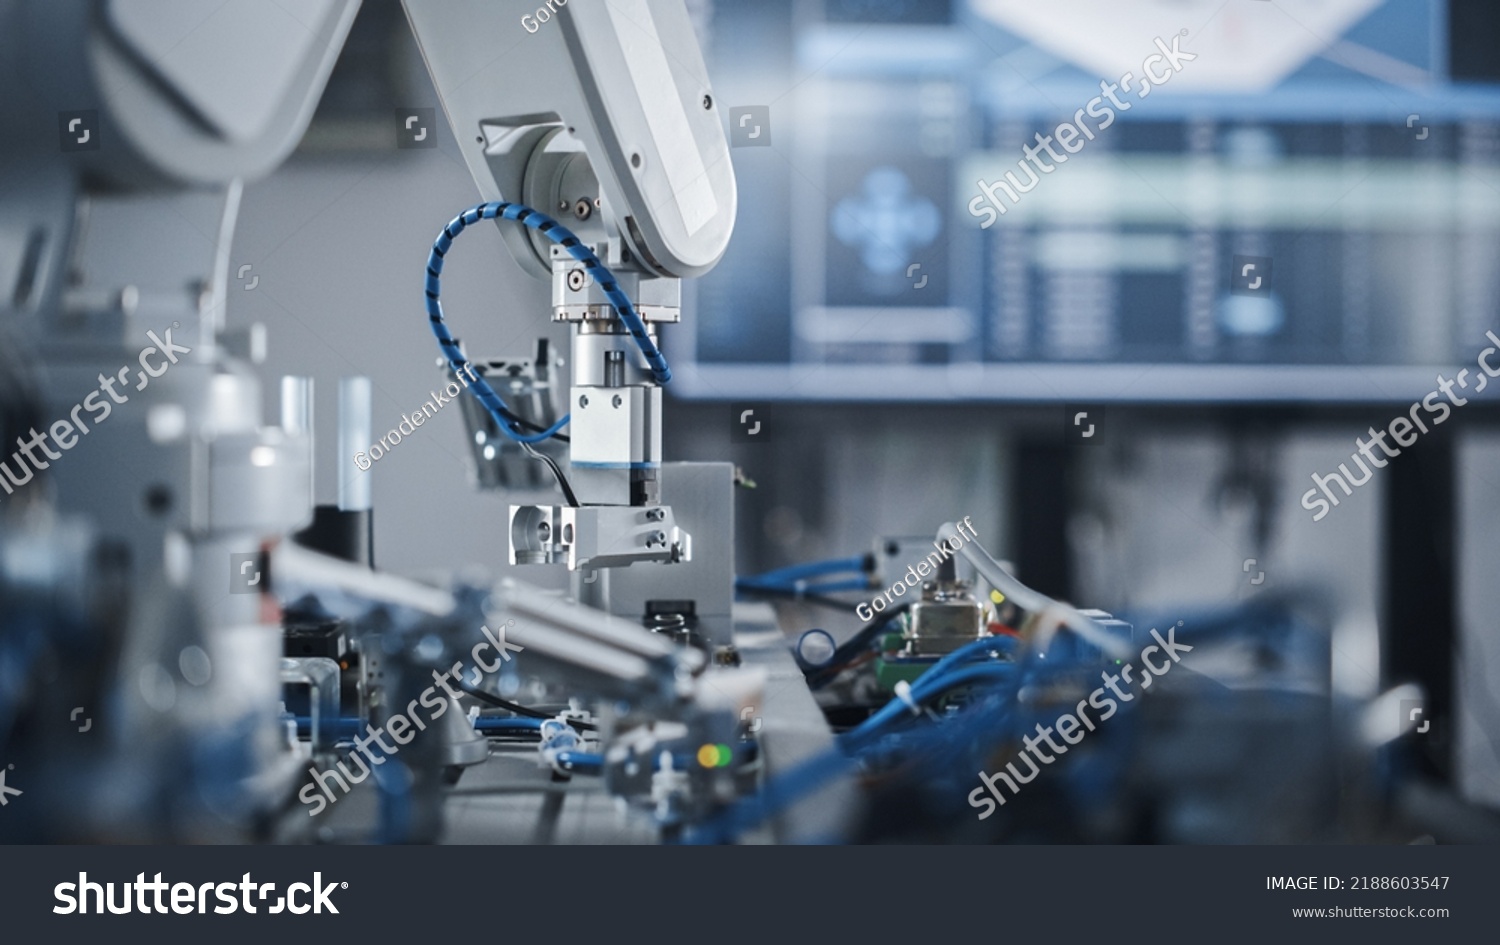 Robotics Industry Four Engineering Facility Robot Arm Moving at Different Directions. High Tech Industrial Technology Using Modern Machine Learning. Mass Production Automatics. Close Up #2188603547